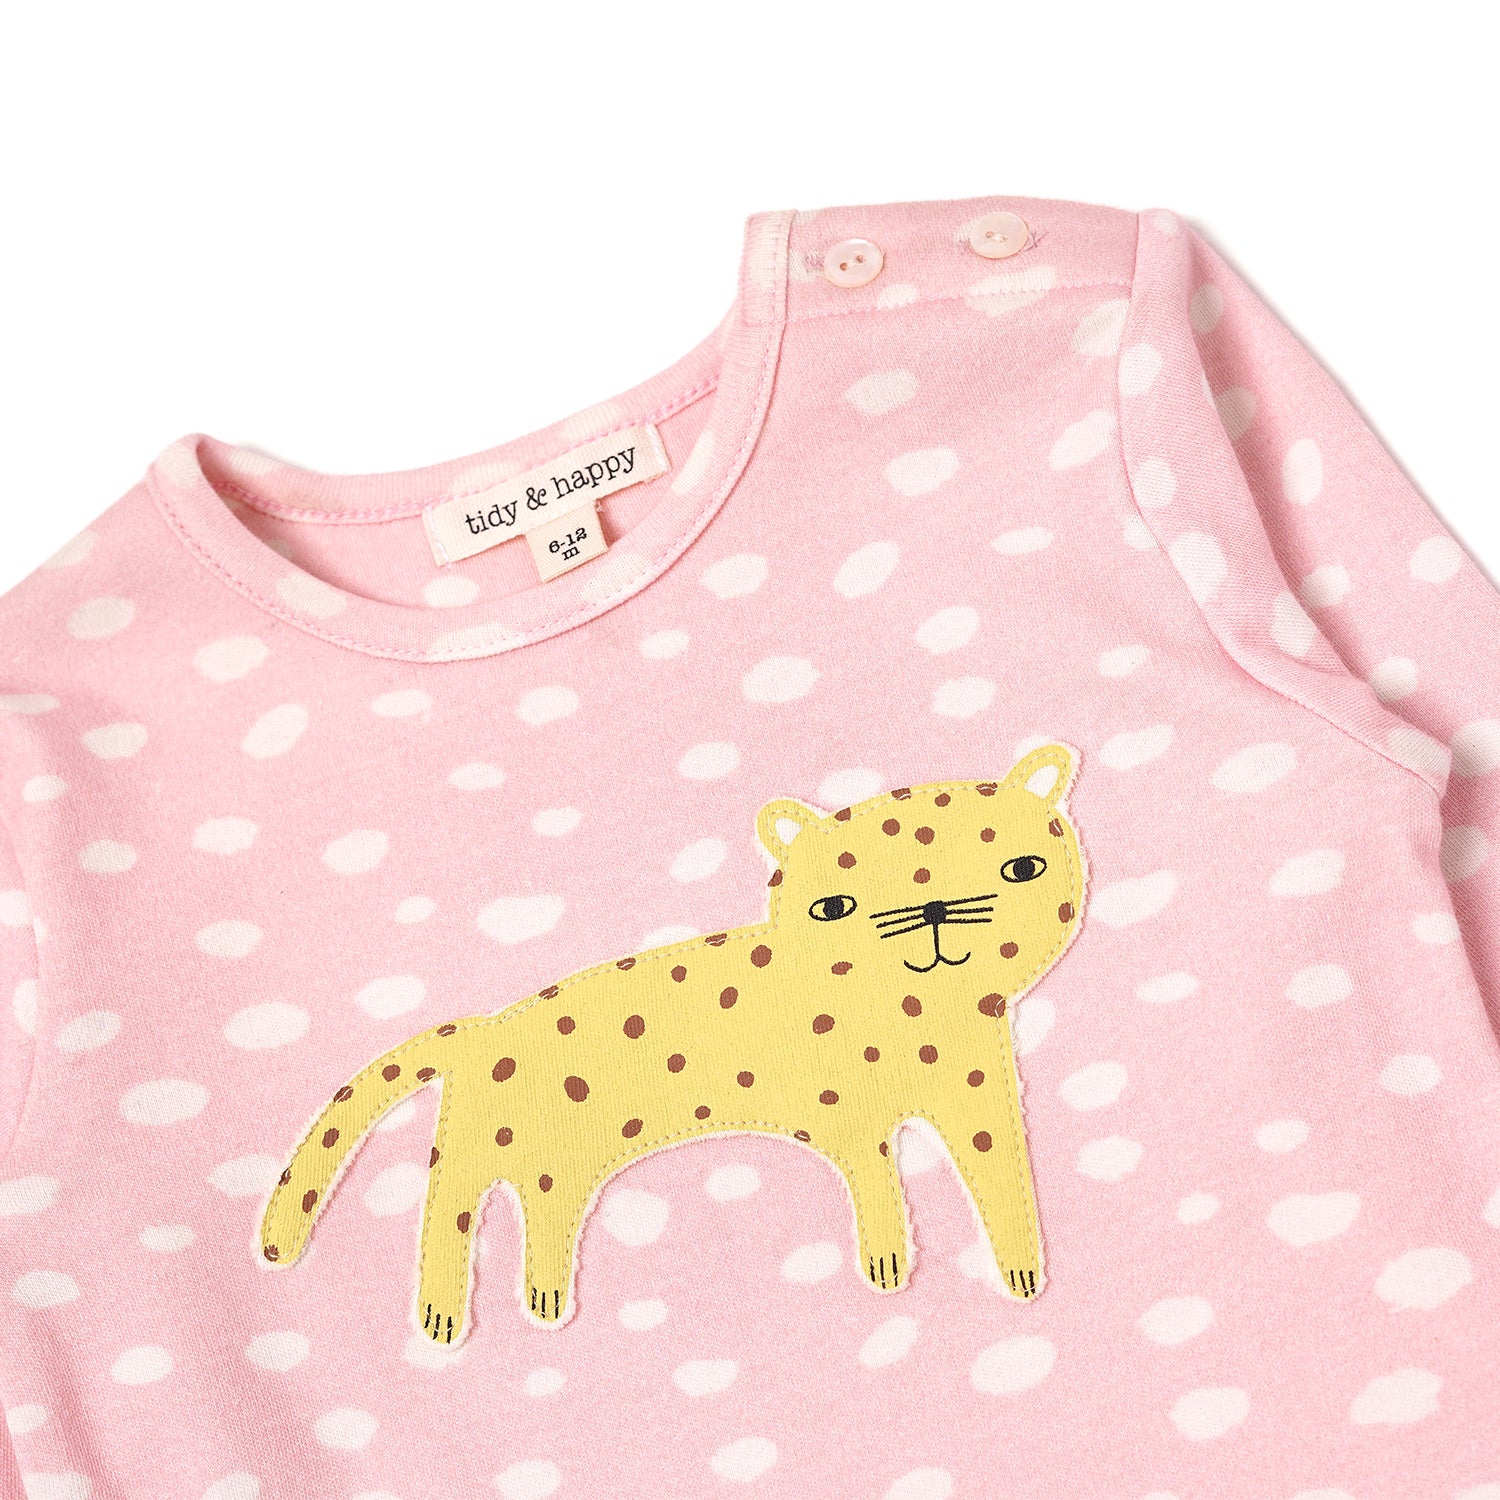 Stylish Comfy Pink Polka (Leopard Print) Top for baby Girls